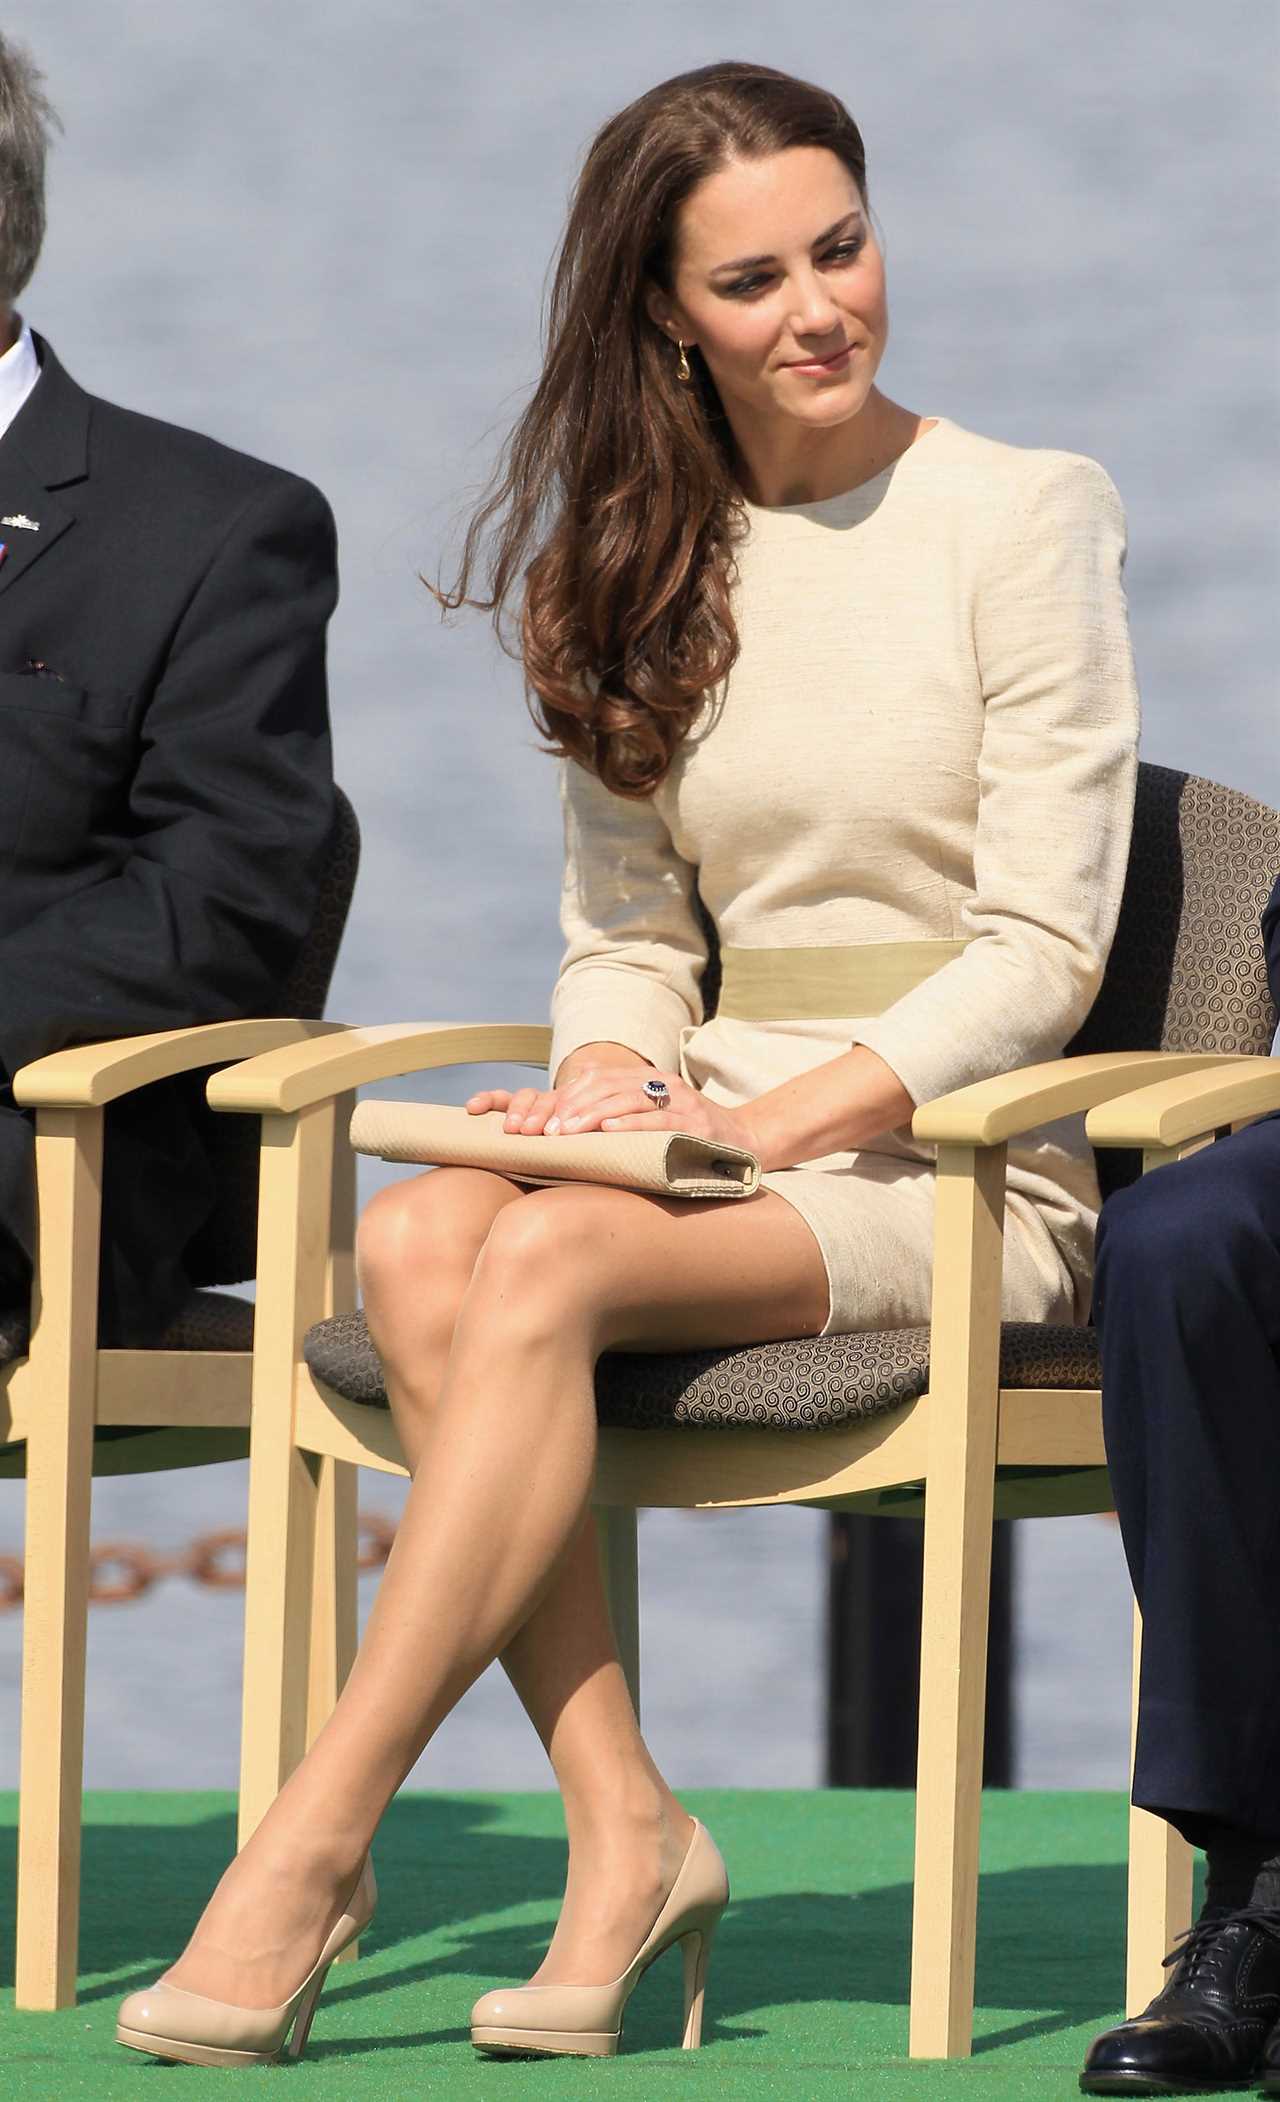 Kate looked flawless in a nude dress and heels that displayed her slender pins when she was in Canada in 2011